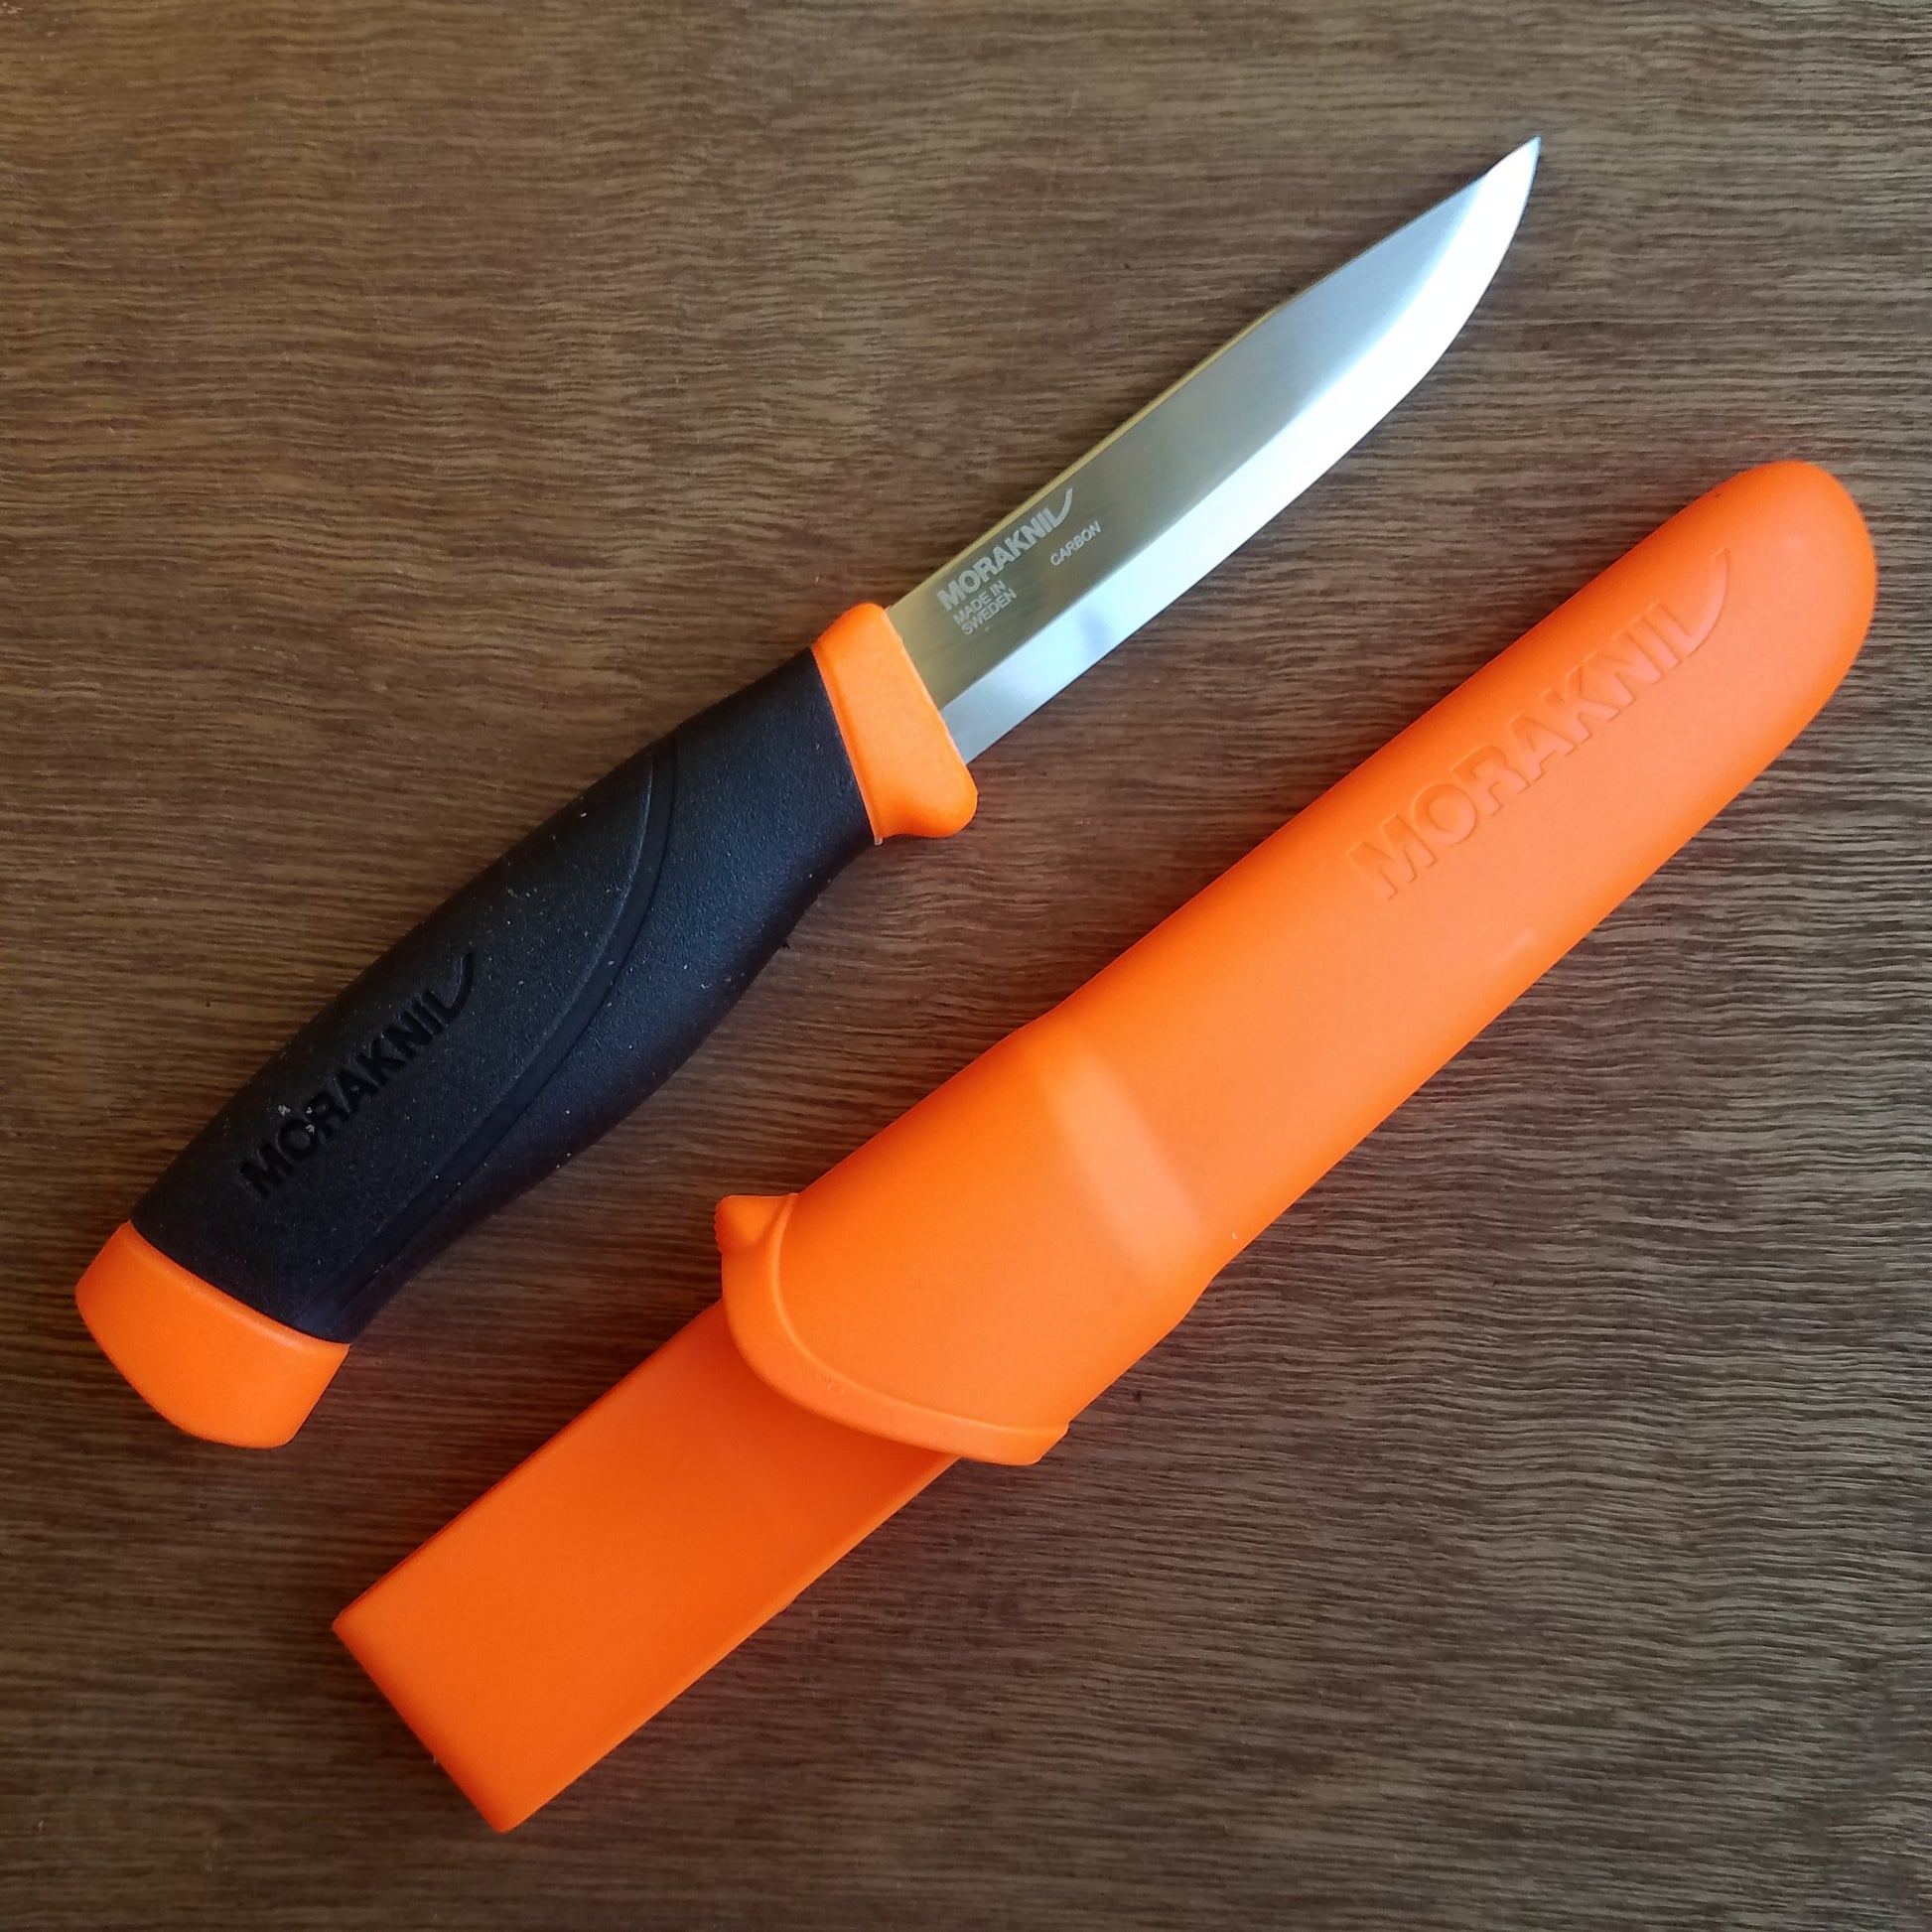 Morakniv Companion, which ones are the best? See all models!